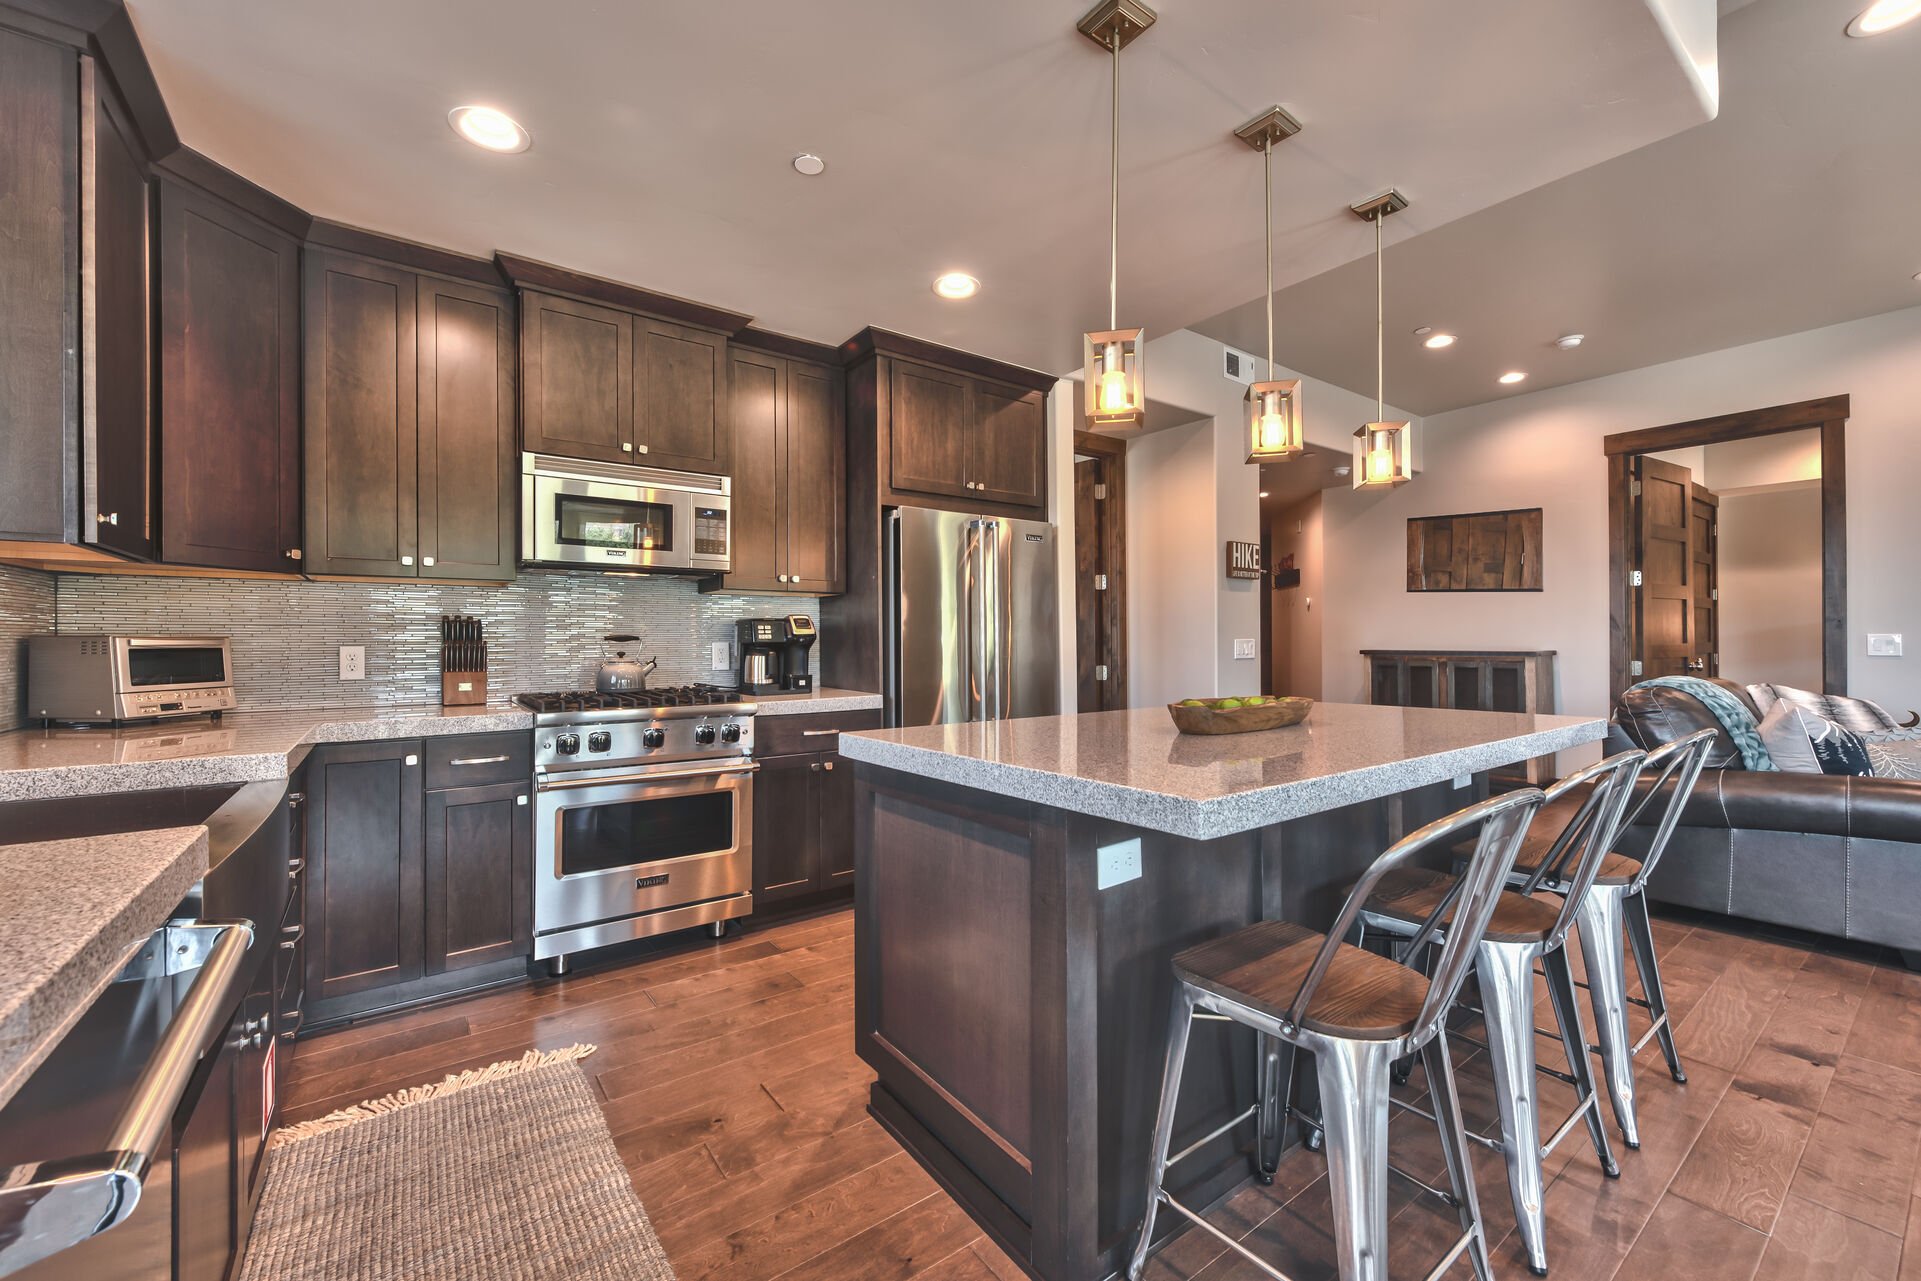 Fully Equipped Gourmet Kitchen with Quartz Counters, Viking Stainless Steel Appliances, including a Gas Range, and Kitchen Island Seating for 3